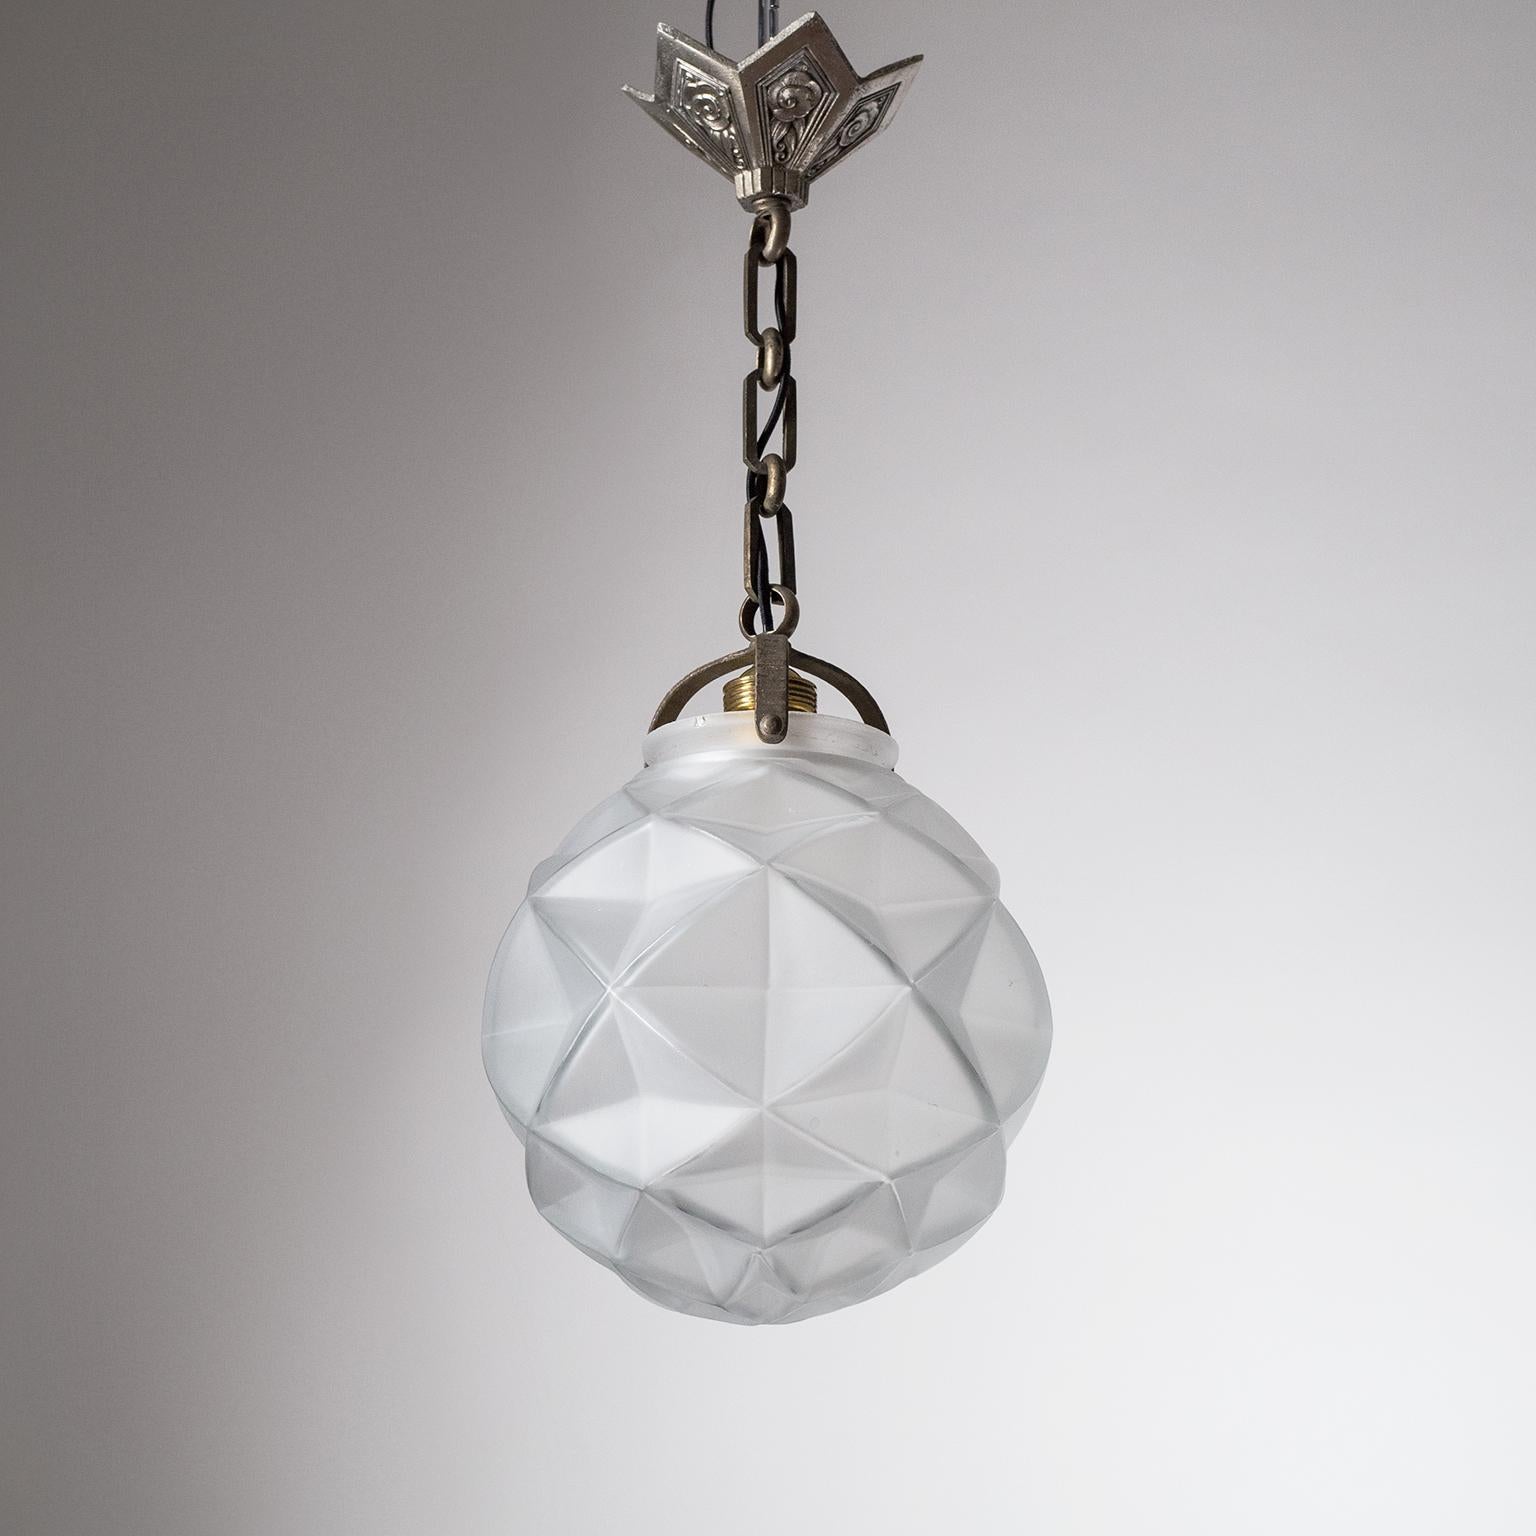 Fine French Art Deco pendant from the 1930s. Nickeled hardware and a geometric shaped glass diffuser with a satin etched finish. Good original condition with patina on the hardware. One brass and ceramic E27 socket with new wiring. Height without